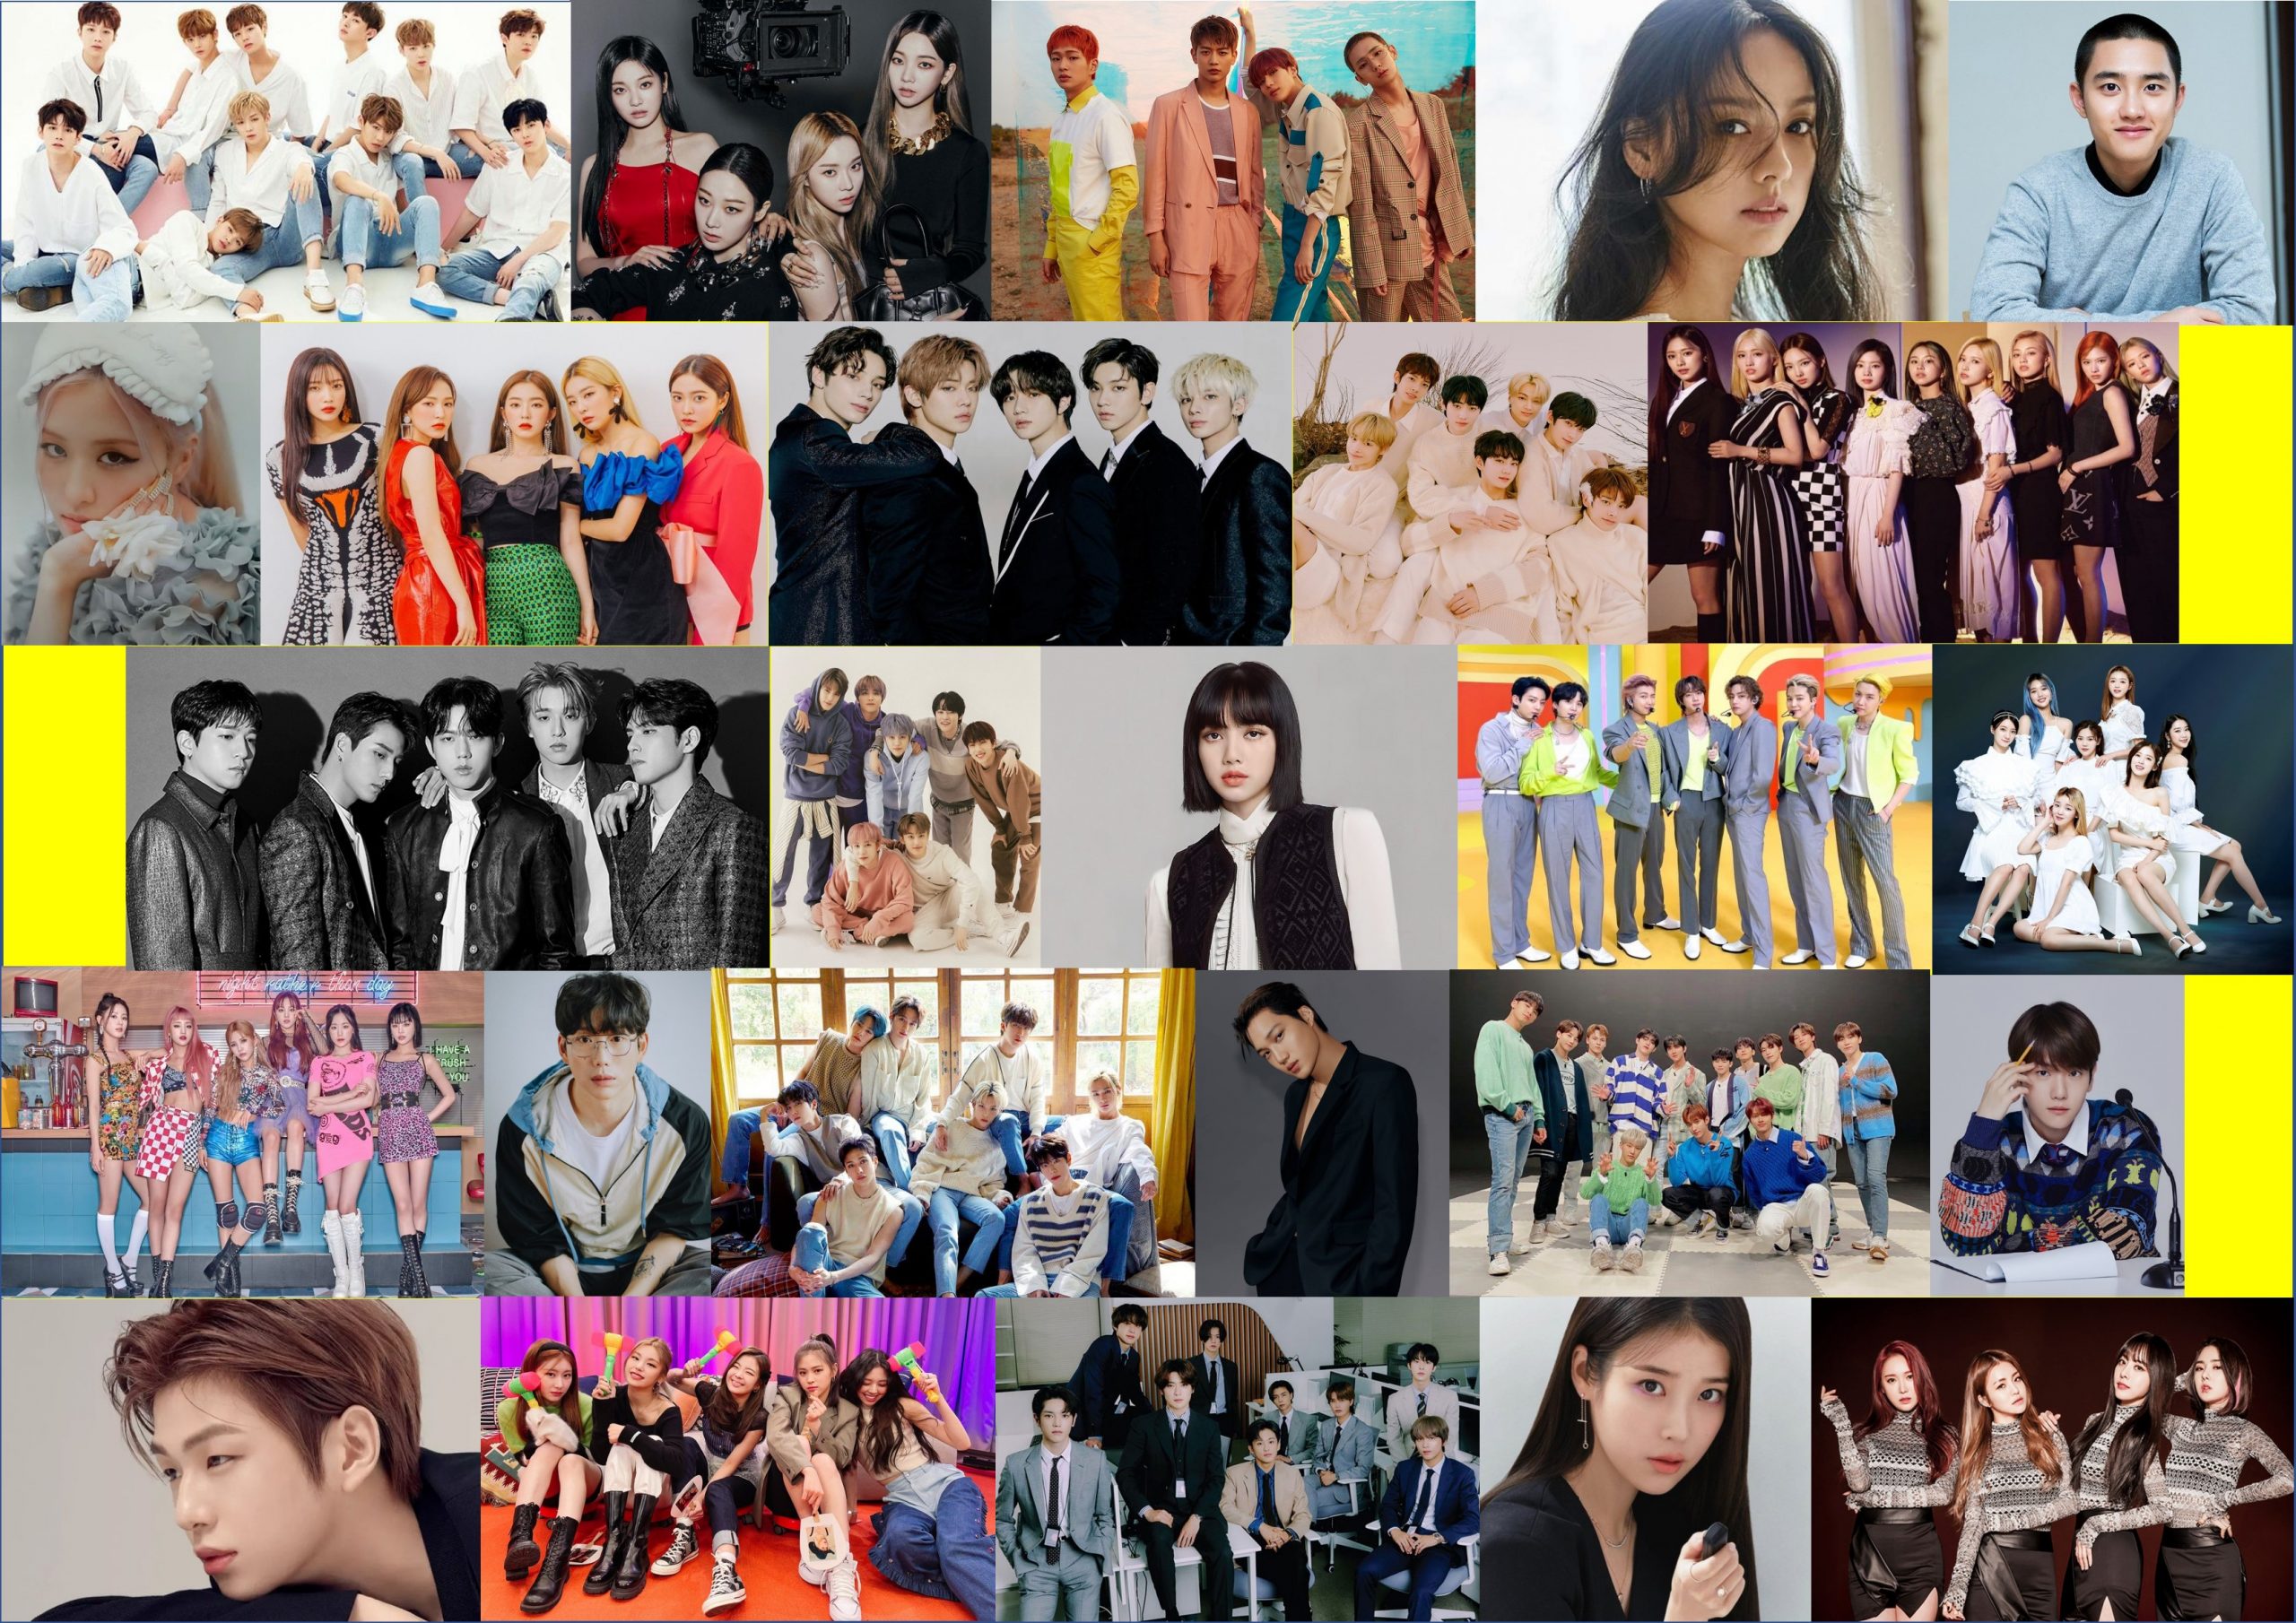 K-Pop Artists. Photos by Joox/Press release. Collage by News Hub Asia.